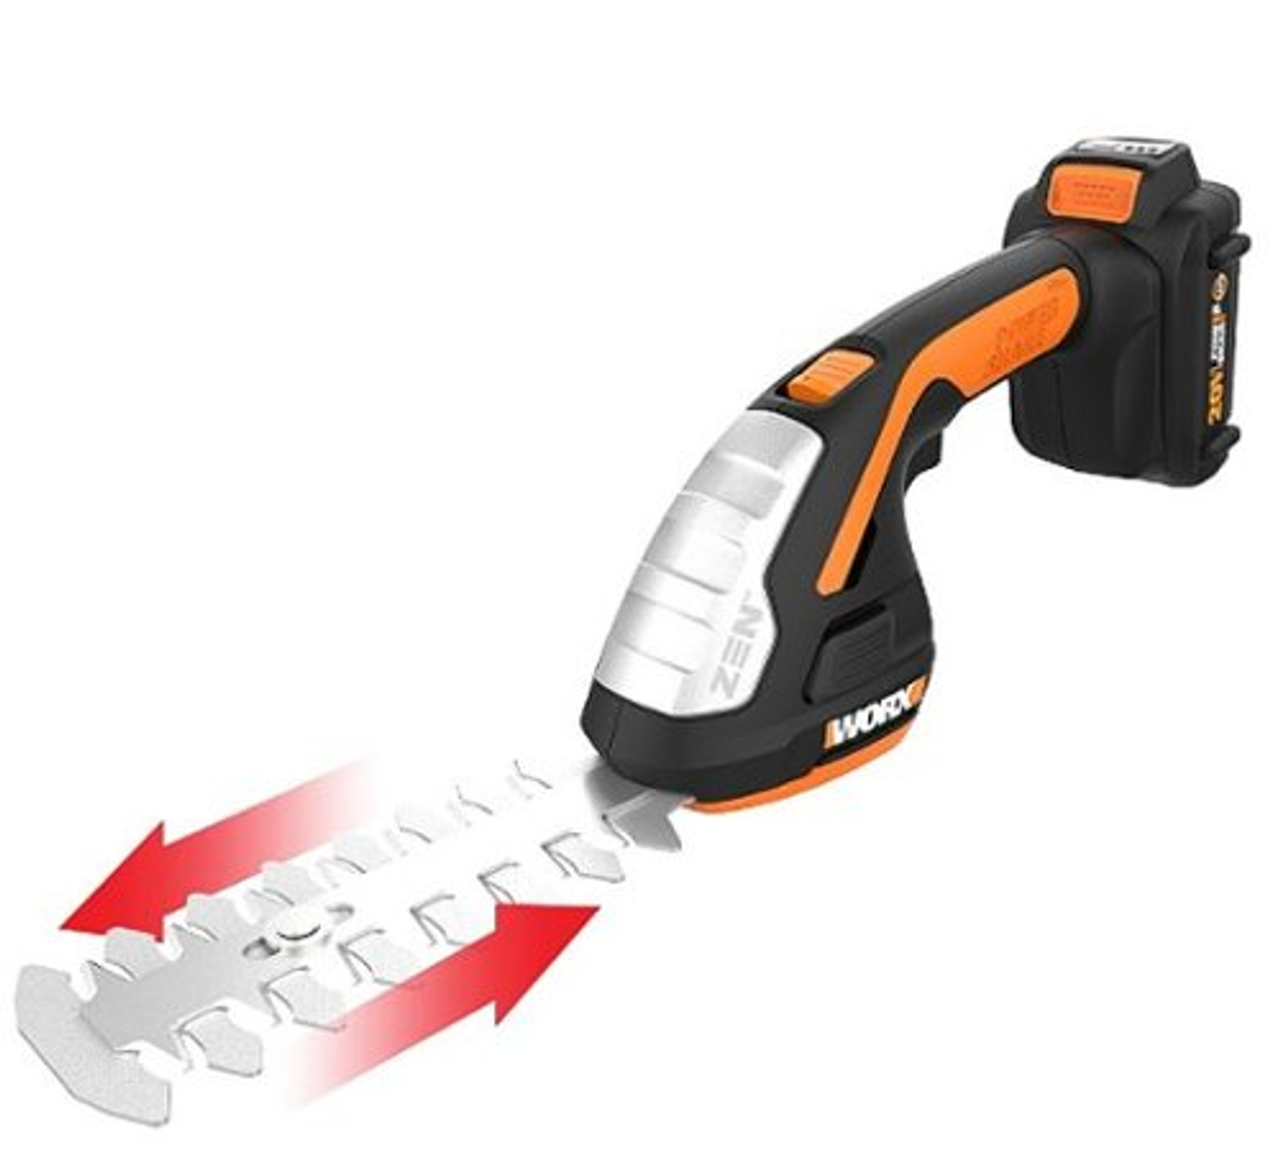 Worx WG801 20V Power Share Cordless 4" Shear and 8" Shrubber Trimmer (Battery & Charger Included) - Black